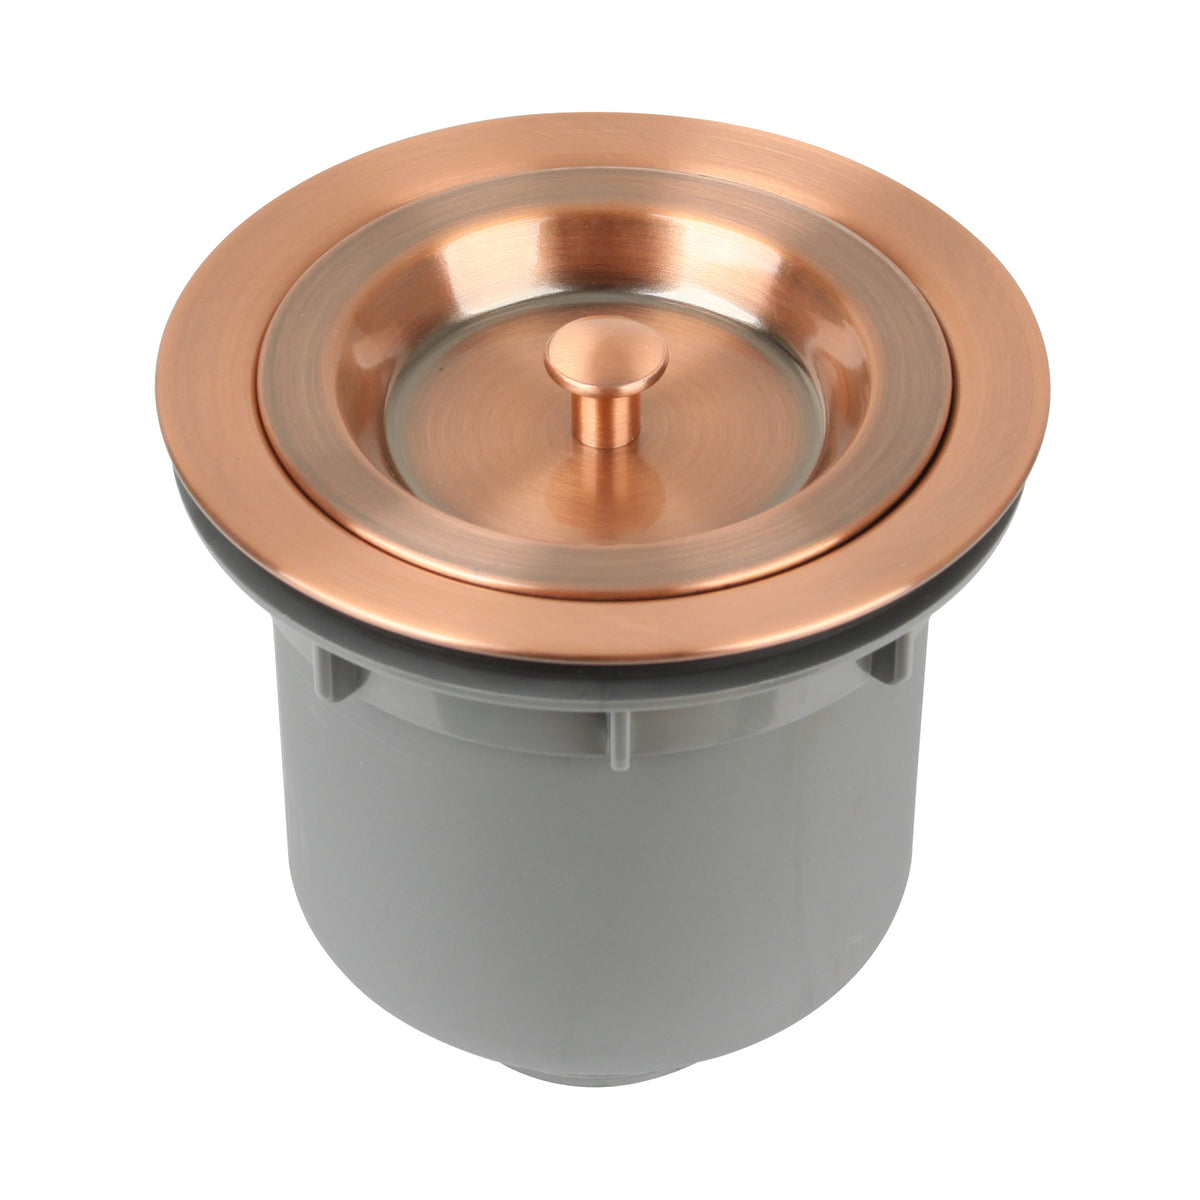 Copper Kitchen Sink Stopper Replacement for 3-1/2 Inch Standard Strainer Drain - AK82103C